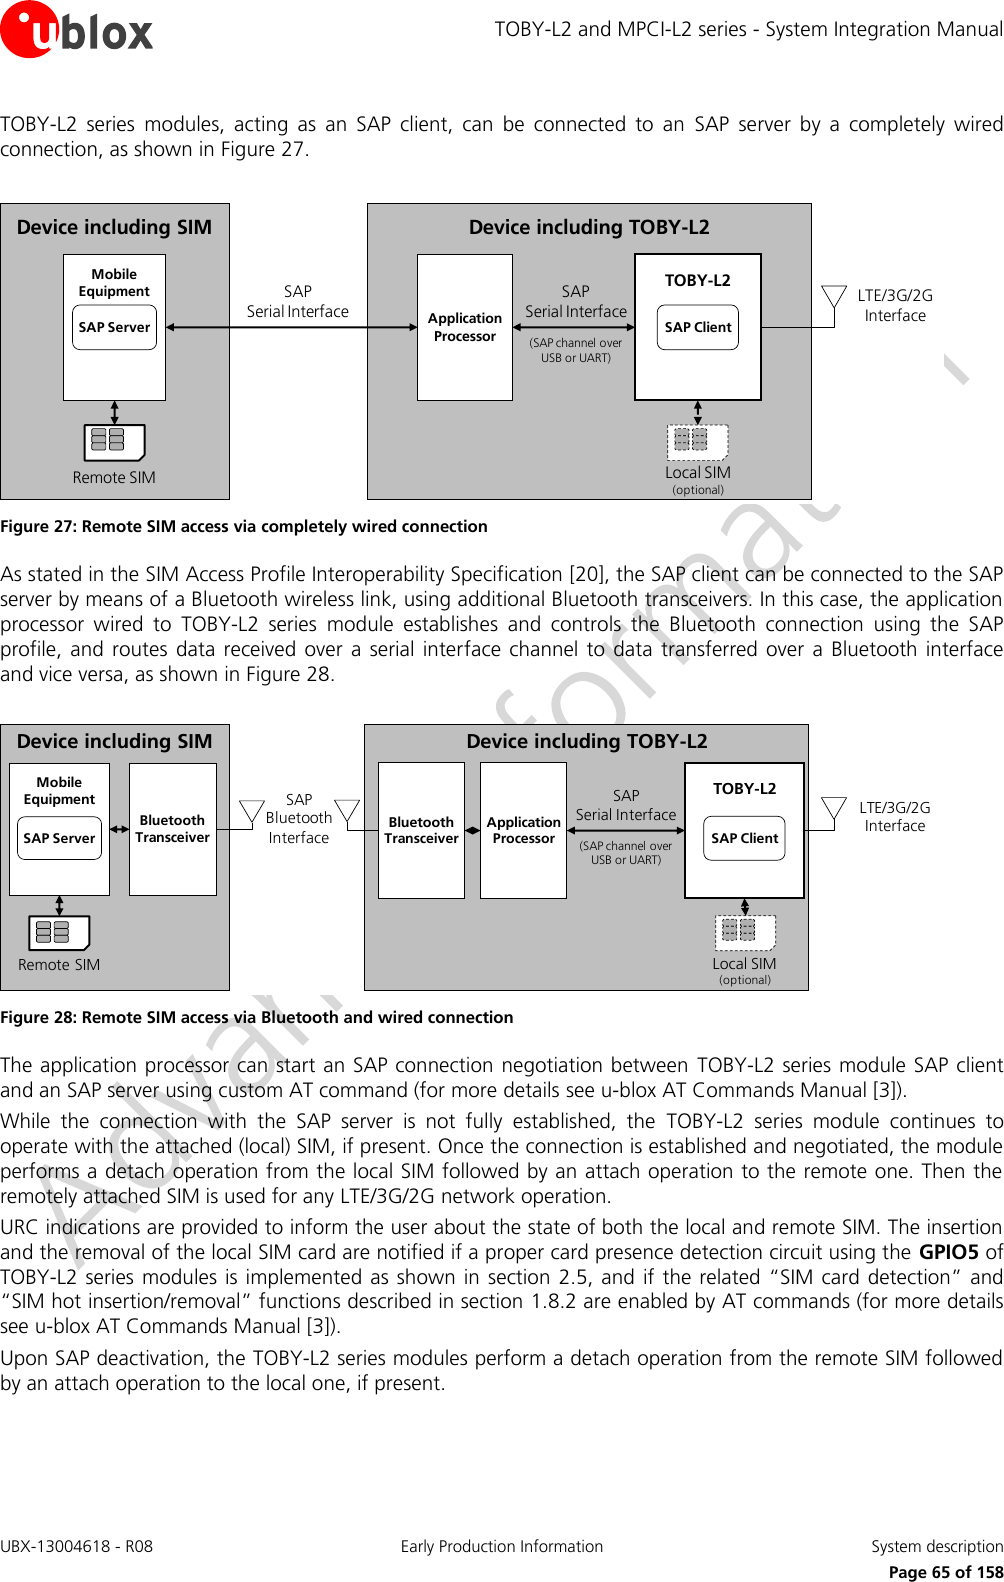 TOBY-L2 and MPCI-L2 series - System Integration Manual UBX-13004618 - R08  Early Production Information  System description     Page 65 of 158 TOBY-L2  series  modules,  acting  as  an  SAP  client,  can  be  connected  to  an  SAP  server  by  a  completely  wired connection, as shown in Figure 27.  Device including TOBY-L2LTE/3G/2G InterfaceLocal SIM(optional)TOBY-L2SAP ClientApplicationProcessorDevice including SIMSAP                   Serial InterfaceRemote SIMMobileEquipmentSAP ServerSAP              Serial Interface(SAP channel over USB or UART) Figure 27: Remote SIM access via completely wired connection As stated in the SIM Access Profile Interoperability Specification [20], the SAP client can be connected to the SAP server by means of a Bluetooth wireless link, using additional Bluetooth transceivers. In this case, the application processor  wired  to  TOBY-L2  series  module  establishes  and  controls  the  Bluetooth  connection  using  the  SAP profile, and routes  data  received  over  a serial  interface channel to data  transferred over  a  Bluetooth  interface and vice versa, as shown in Figure 28.  Device including TOBY-L2SAP              Serial Interface(SAP channel over USB or UART)LTE/3G/2G InterfaceLocal SIM(optional)TOBY-L2SAP ClientApplicationProcessorSAP  Bluetooth InterfaceBluetoothTransceiverDevice including SIMRemote SIMMobileEquipmentSAP ServerBluetoothTransceiver Figure 28: Remote SIM access via Bluetooth and wired connection The application processor can start an SAP connection negotiation between  TOBY-L2 series  module SAP client and an SAP server using custom AT command (for more details see u-blox AT Commands Manual [3]). While  the  connection  with  the  SAP  server  is  not  fully  established,  the  TOBY-L2  series  module  continues  to operate with the attached (local) SIM, if present. Once the connection is established and negotiated, the module performs a detach operation from the local SIM followed by an attach operation to the remote one. Then the remotely attached SIM is used for any LTE/3G/2G network operation. URC indications are provided to inform the user about the state of both the local and remote SIM. The insertion and the removal of the local SIM card are notified if a proper card presence detection circuit using the GPIO5 of TOBY-L2  series modules is implemented as shown  in  section 2.5, and  if  the  related “SIM card detection” and “SIM hot insertion/removal” functions described in section 1.8.2 are enabled by AT commands (for more details see u-blox AT Commands Manual [3]). Upon SAP deactivation, the TOBY-L2 series modules perform a detach operation from the remote SIM followed by an attach operation to the local one, if present.  